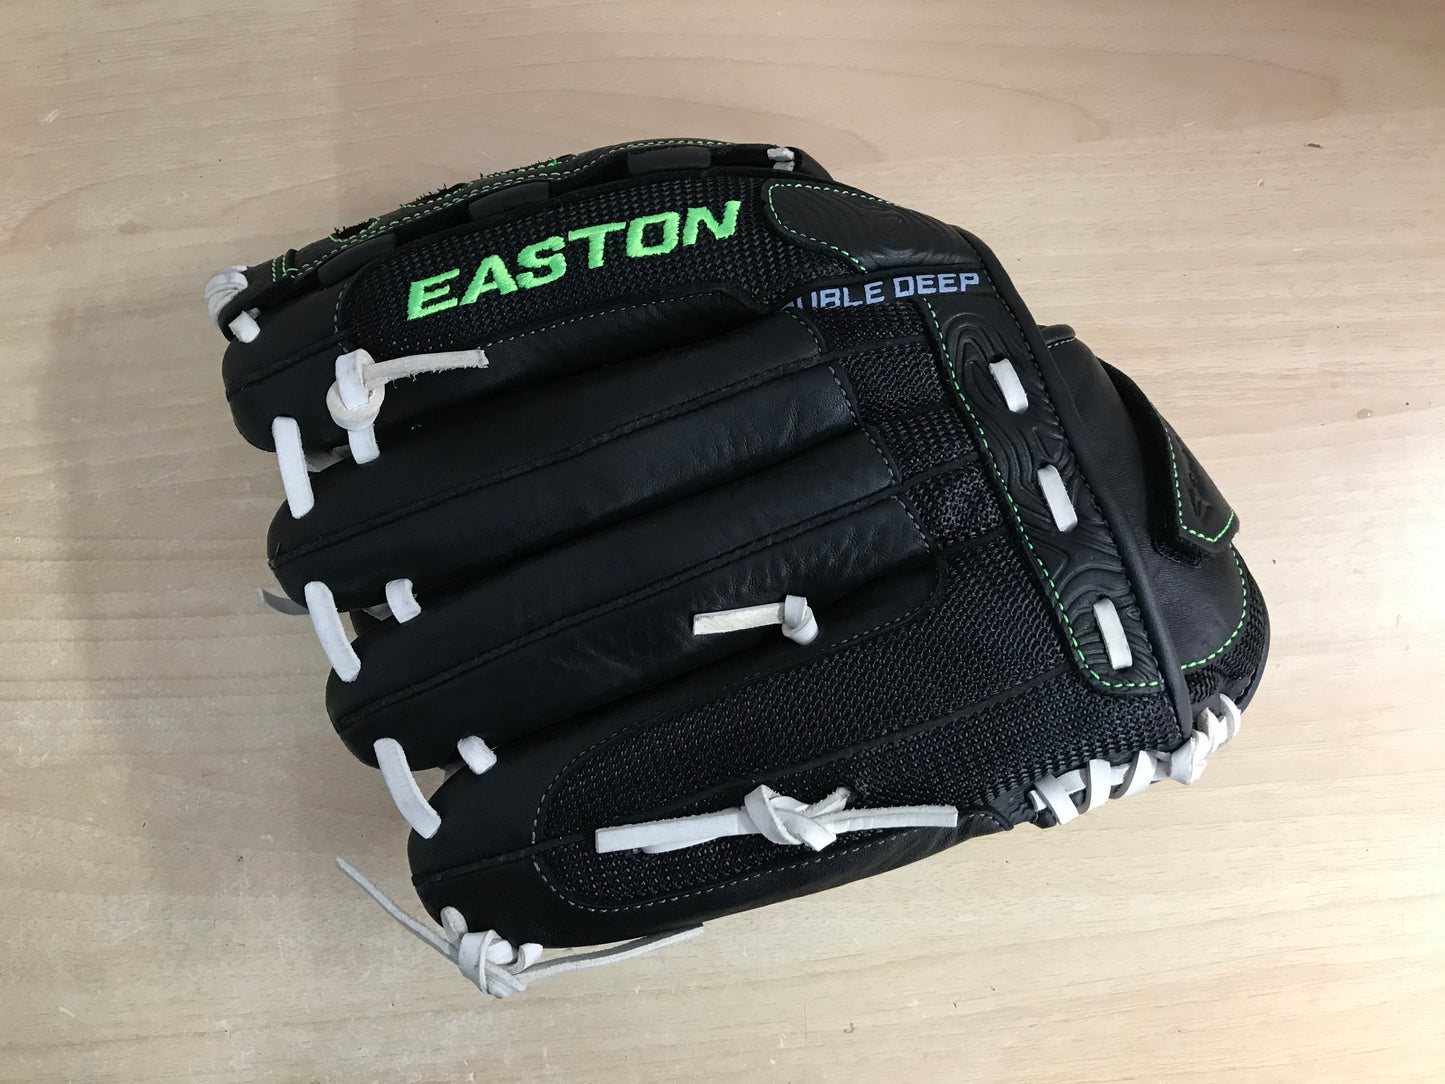 Baseball Glove Adult Size 13 inch Easton Soft Leather Lime Black Fits on Left Hand